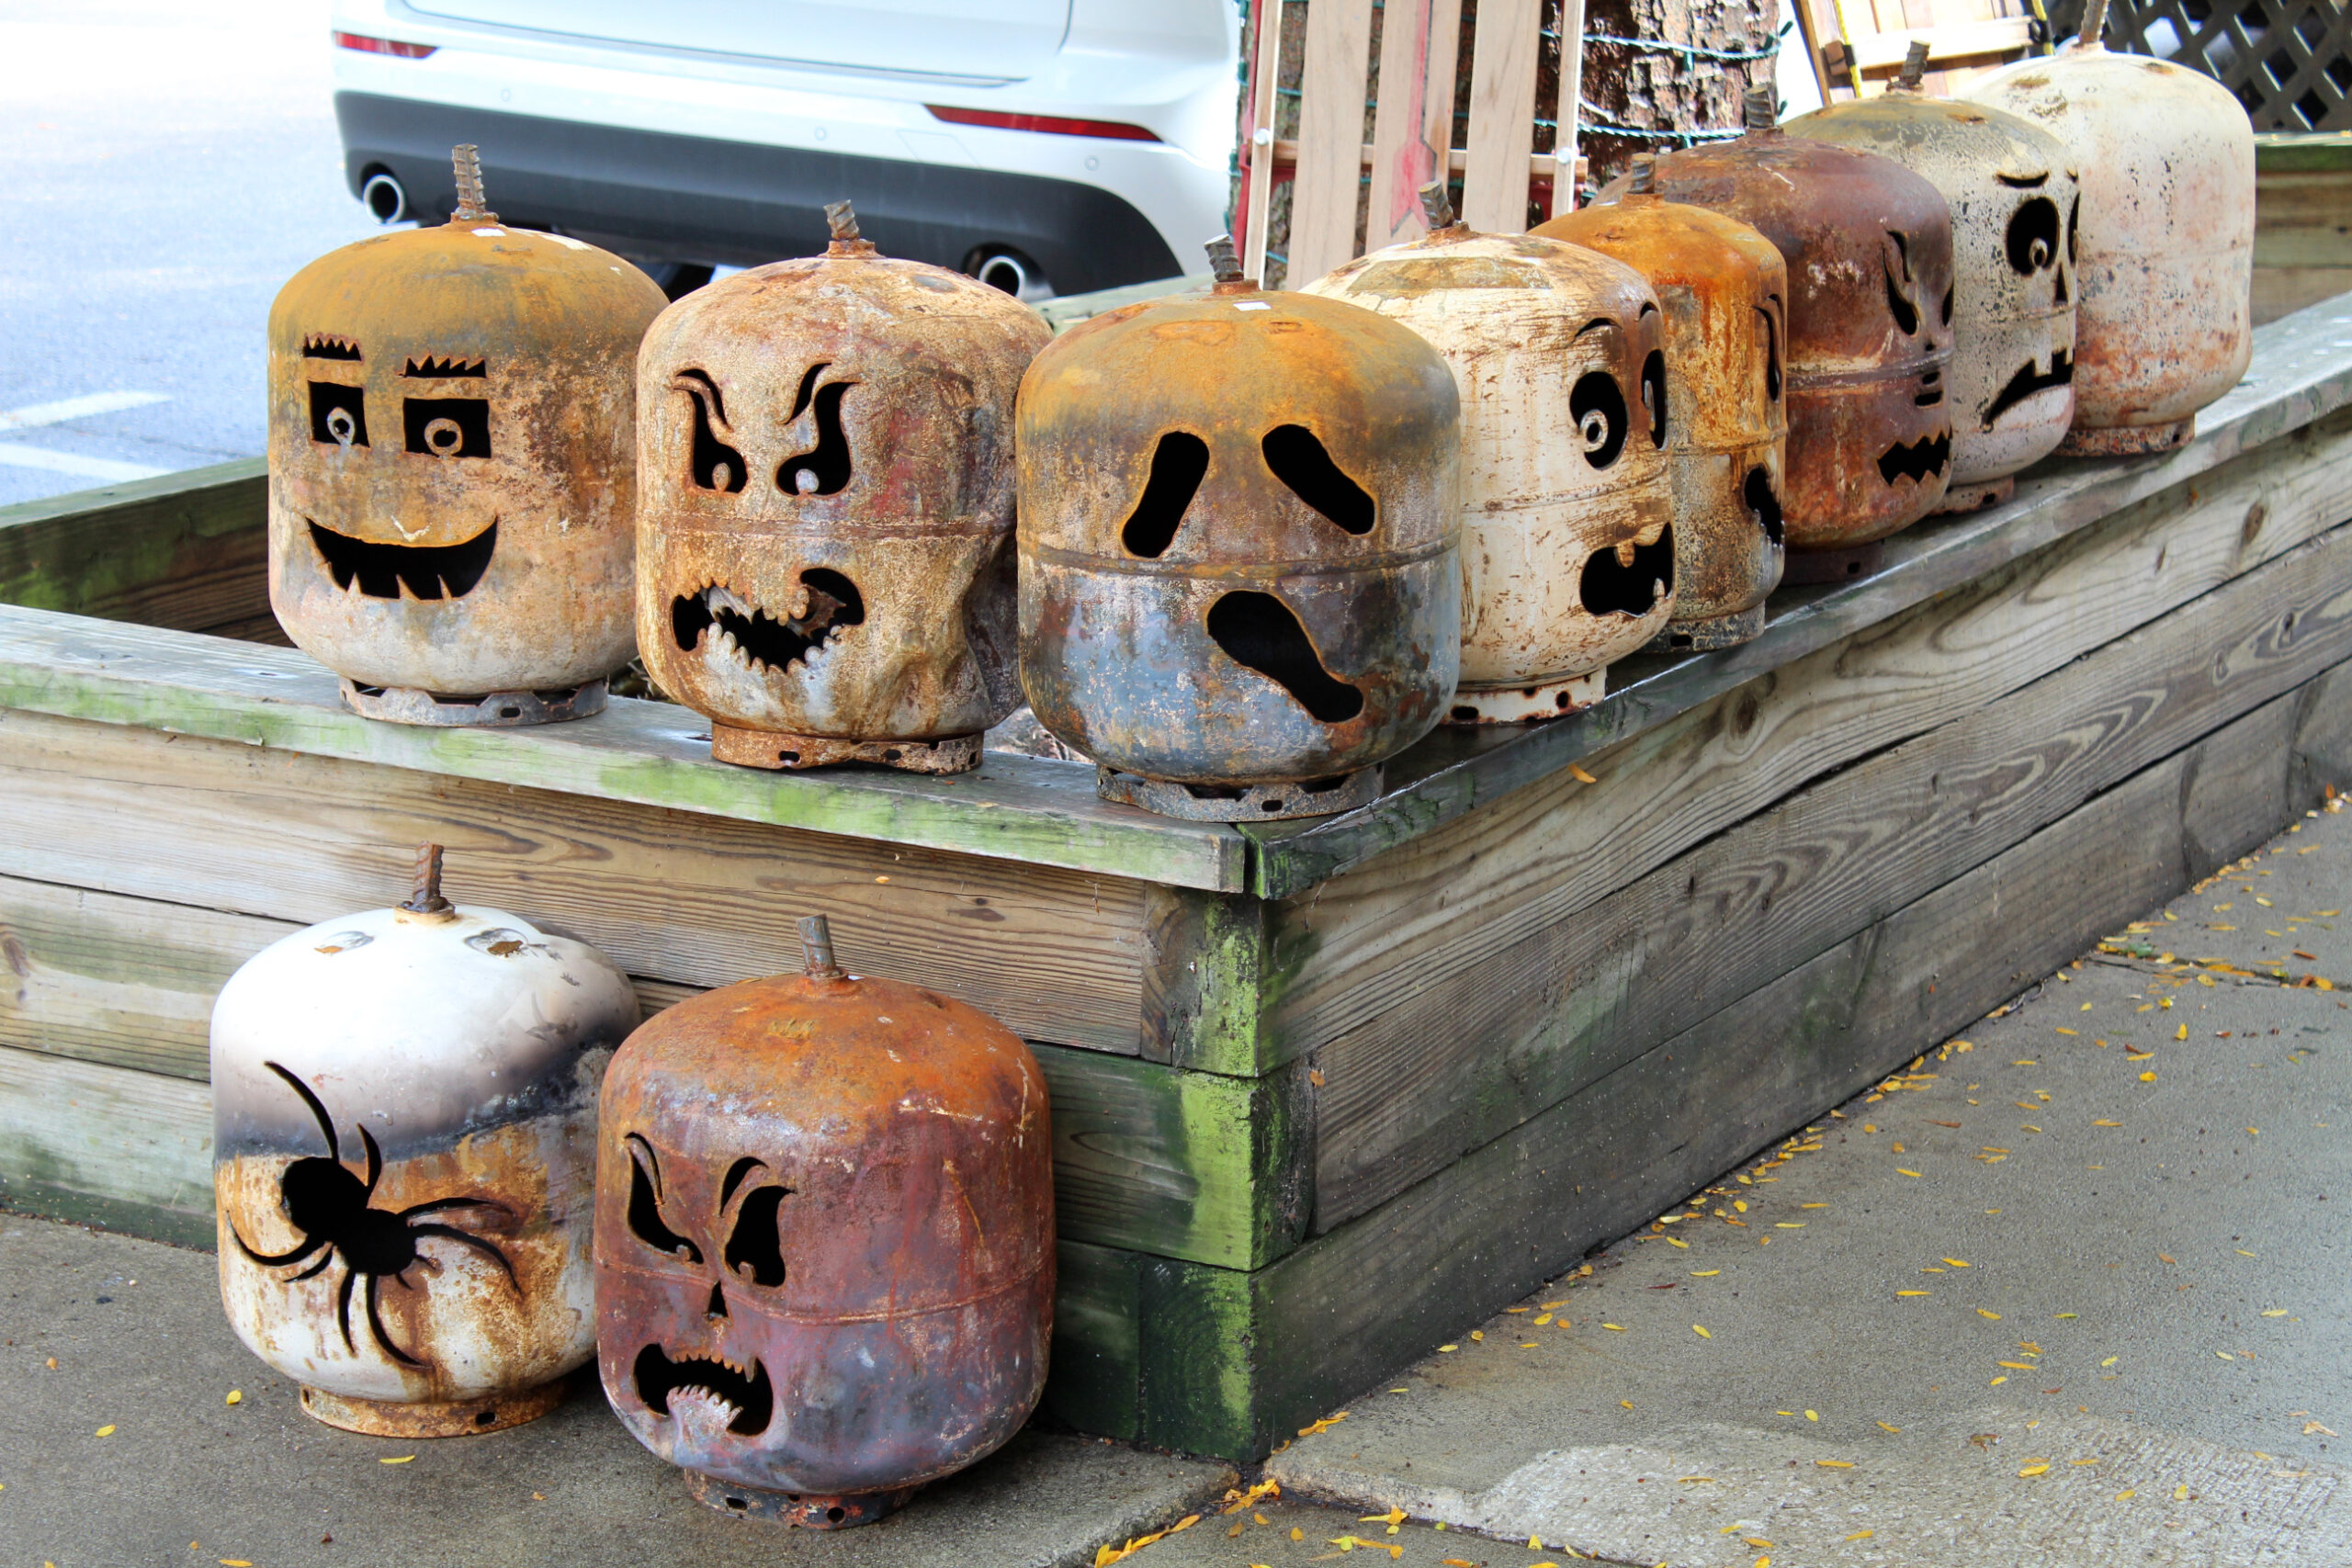 Fun upcycled Halloween propane tanks sell for $45 each